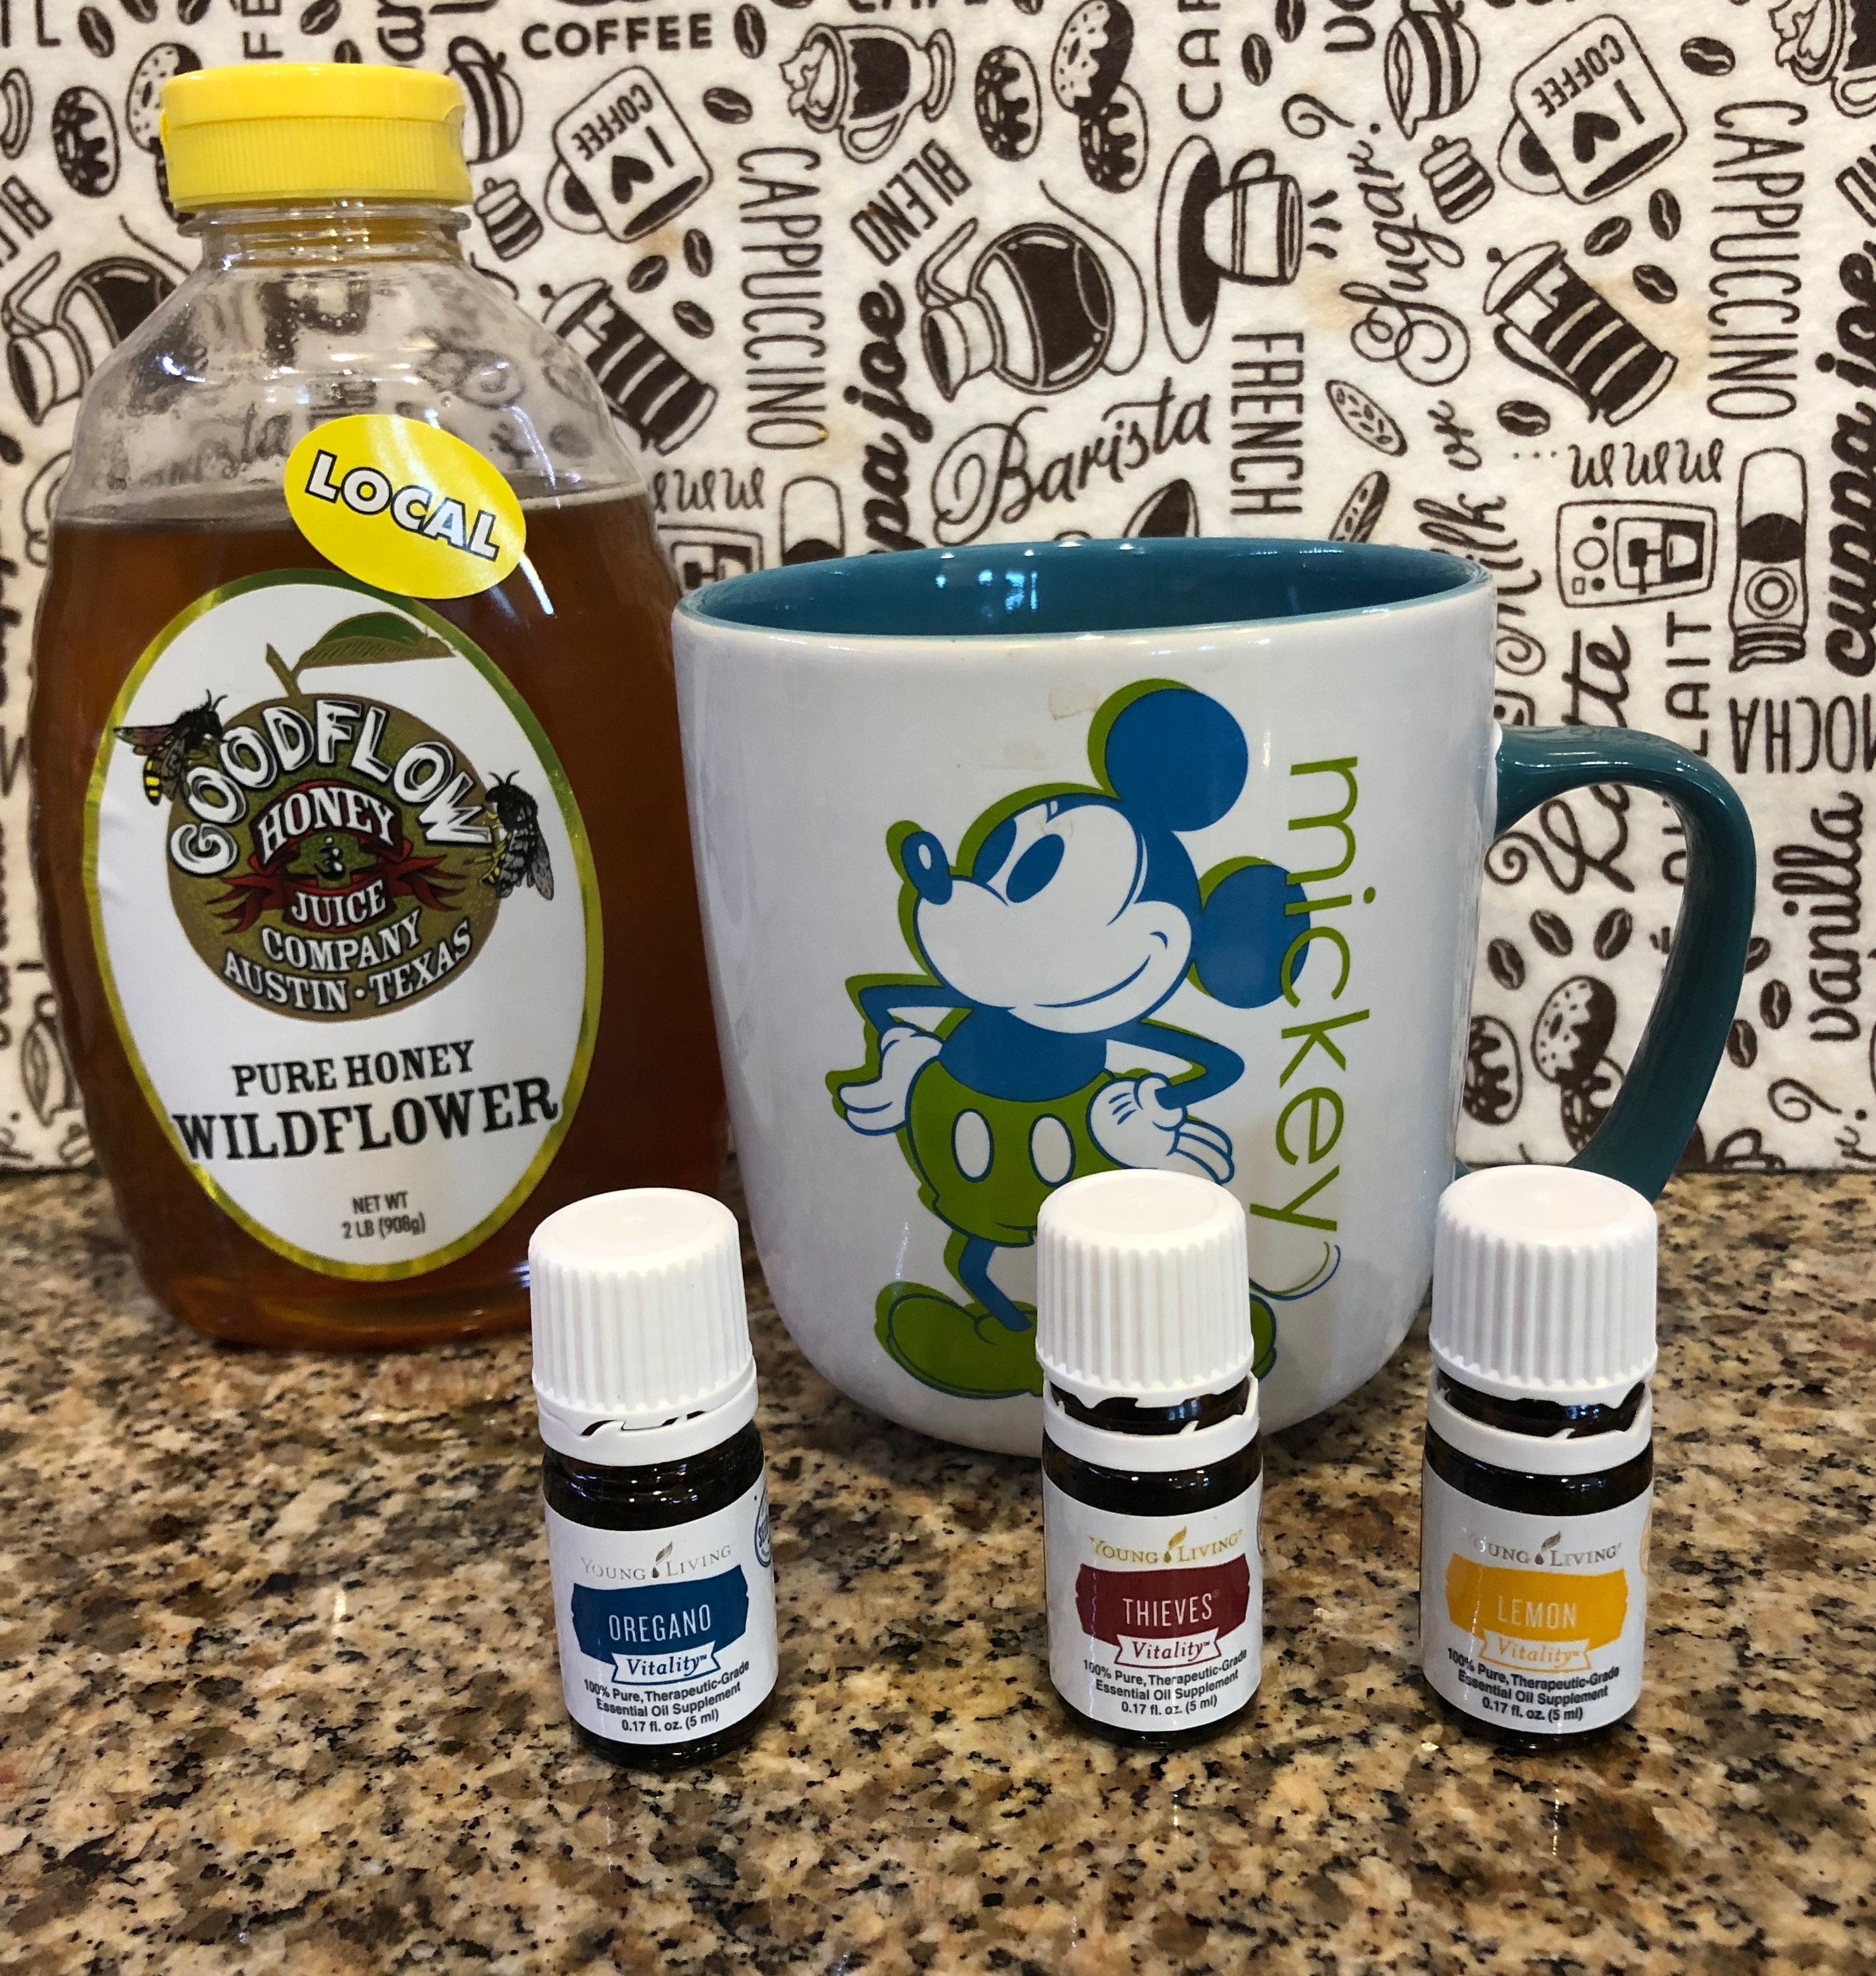 Home Remedy for the Common Cold. Oregano Thieves Limon and Copaiba